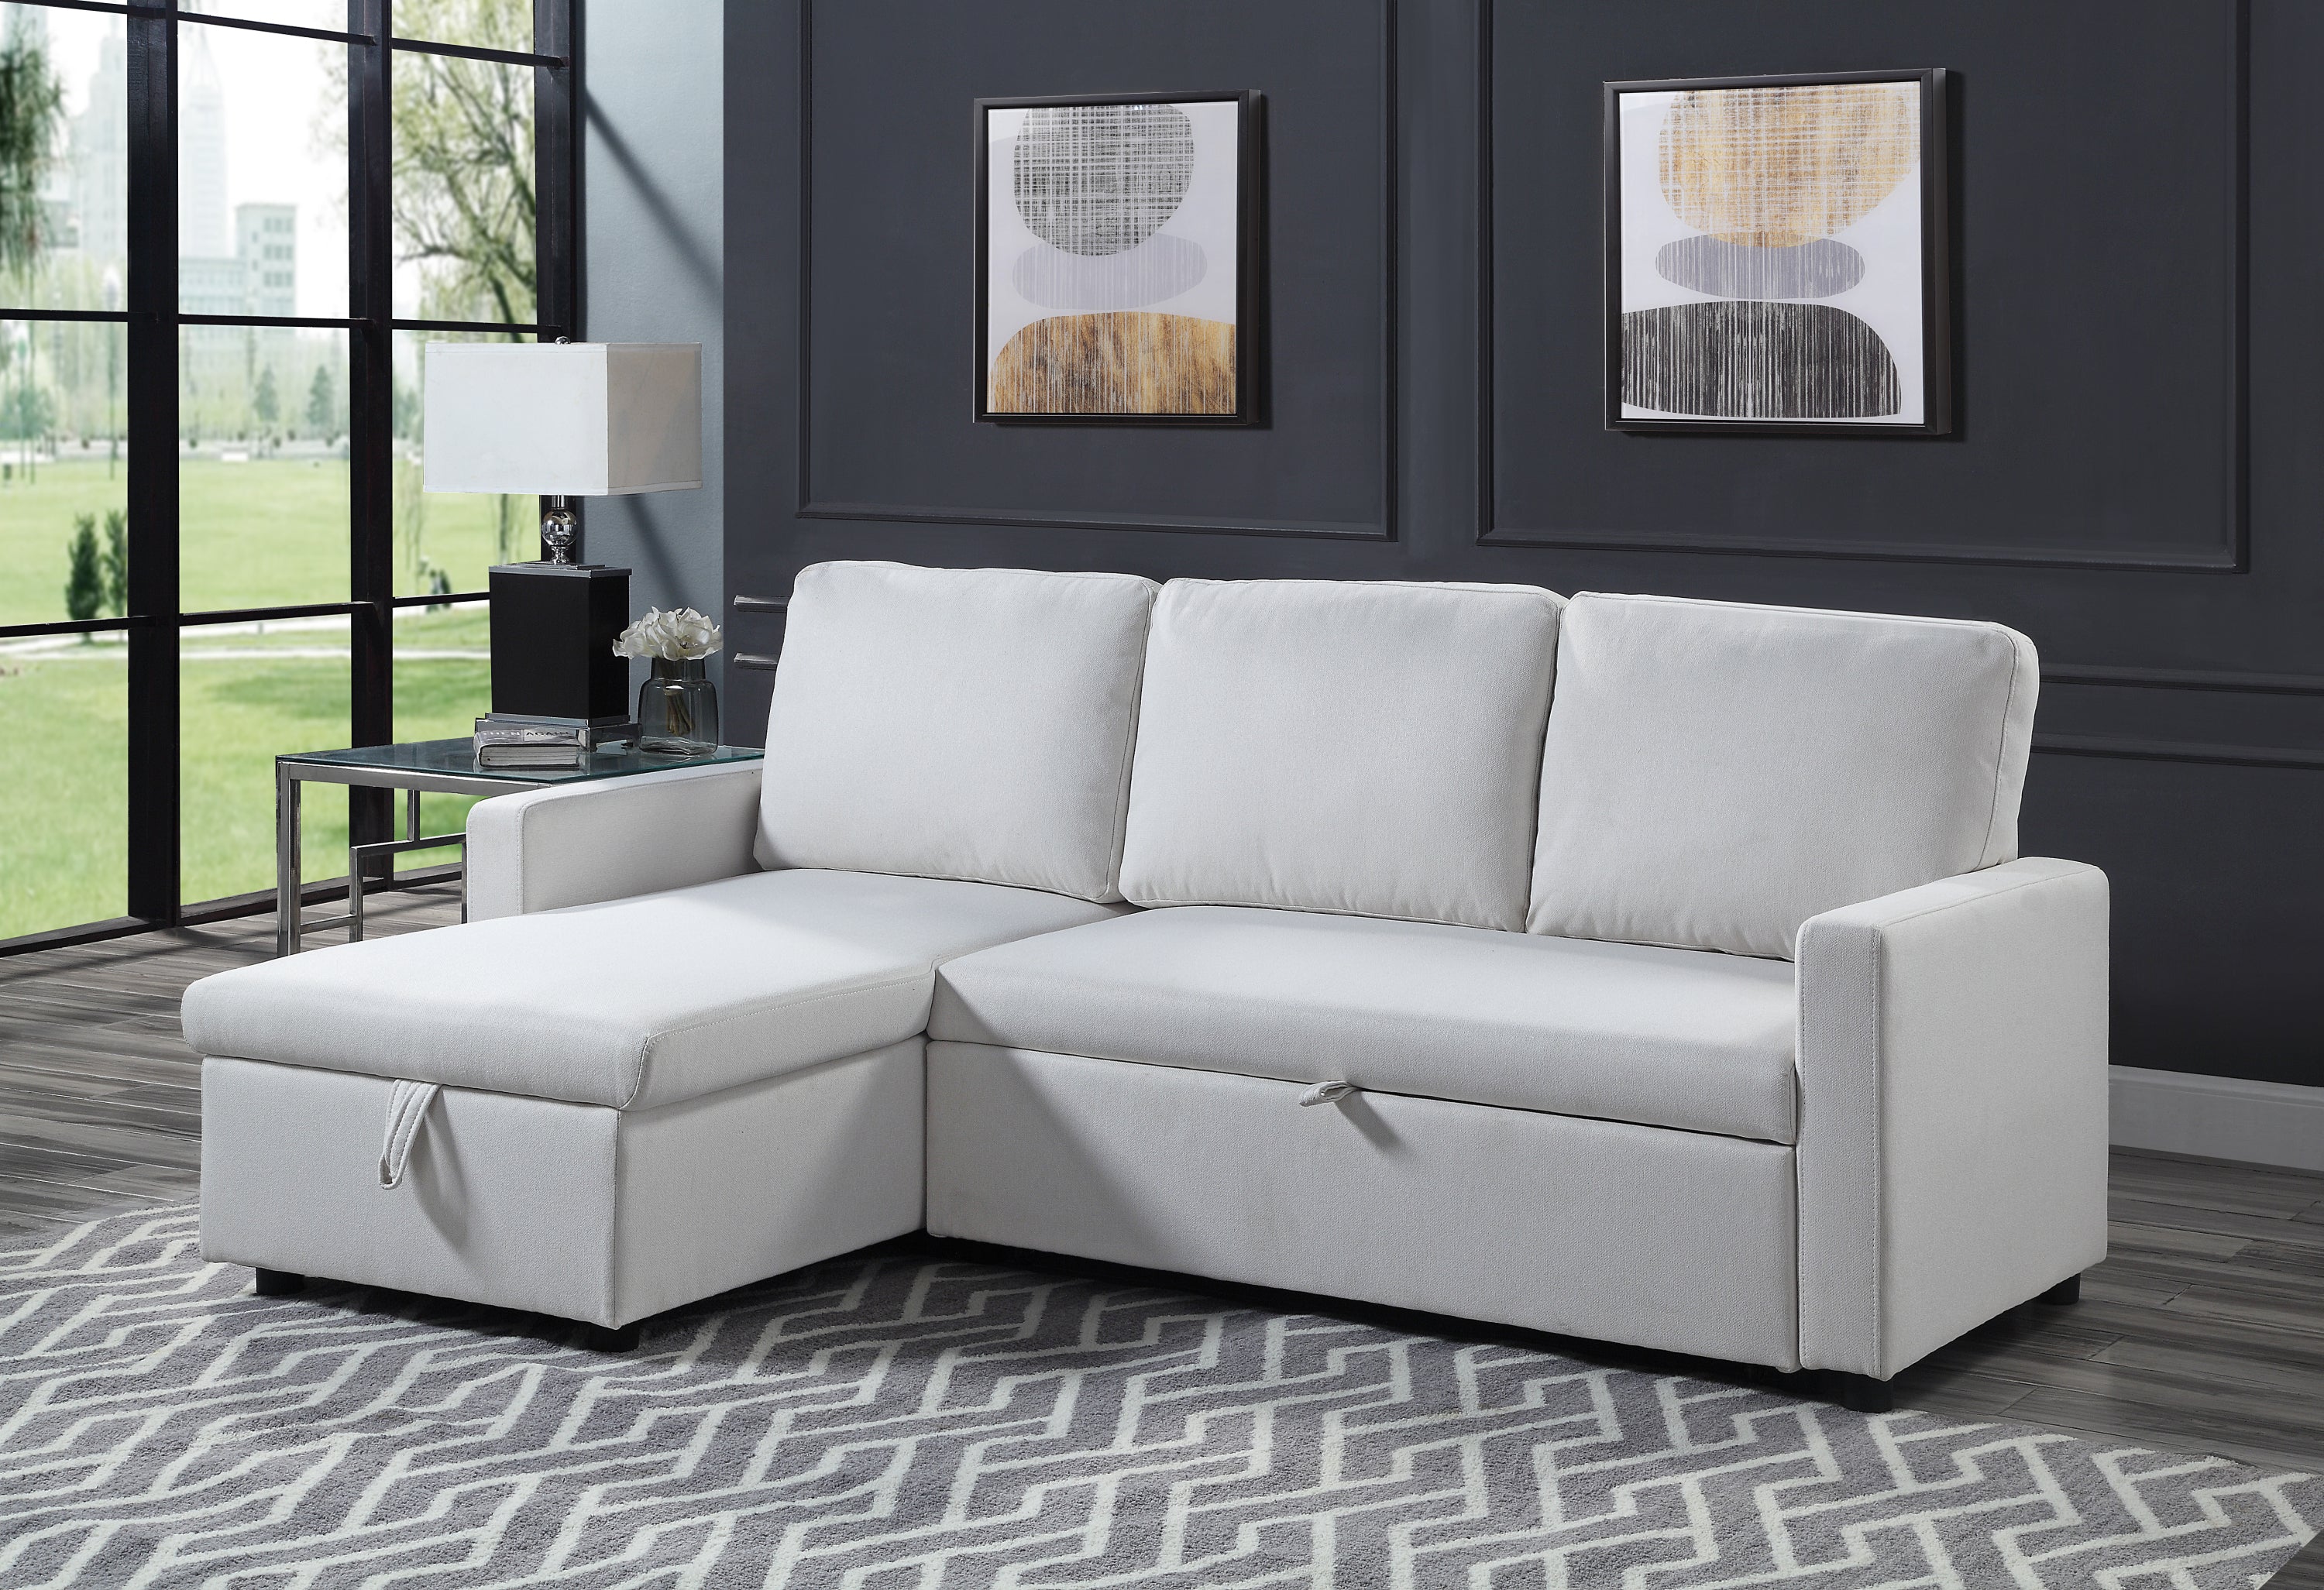 Sleeper Sectional Sofa with Storage & Light Gray Fabric Sectional